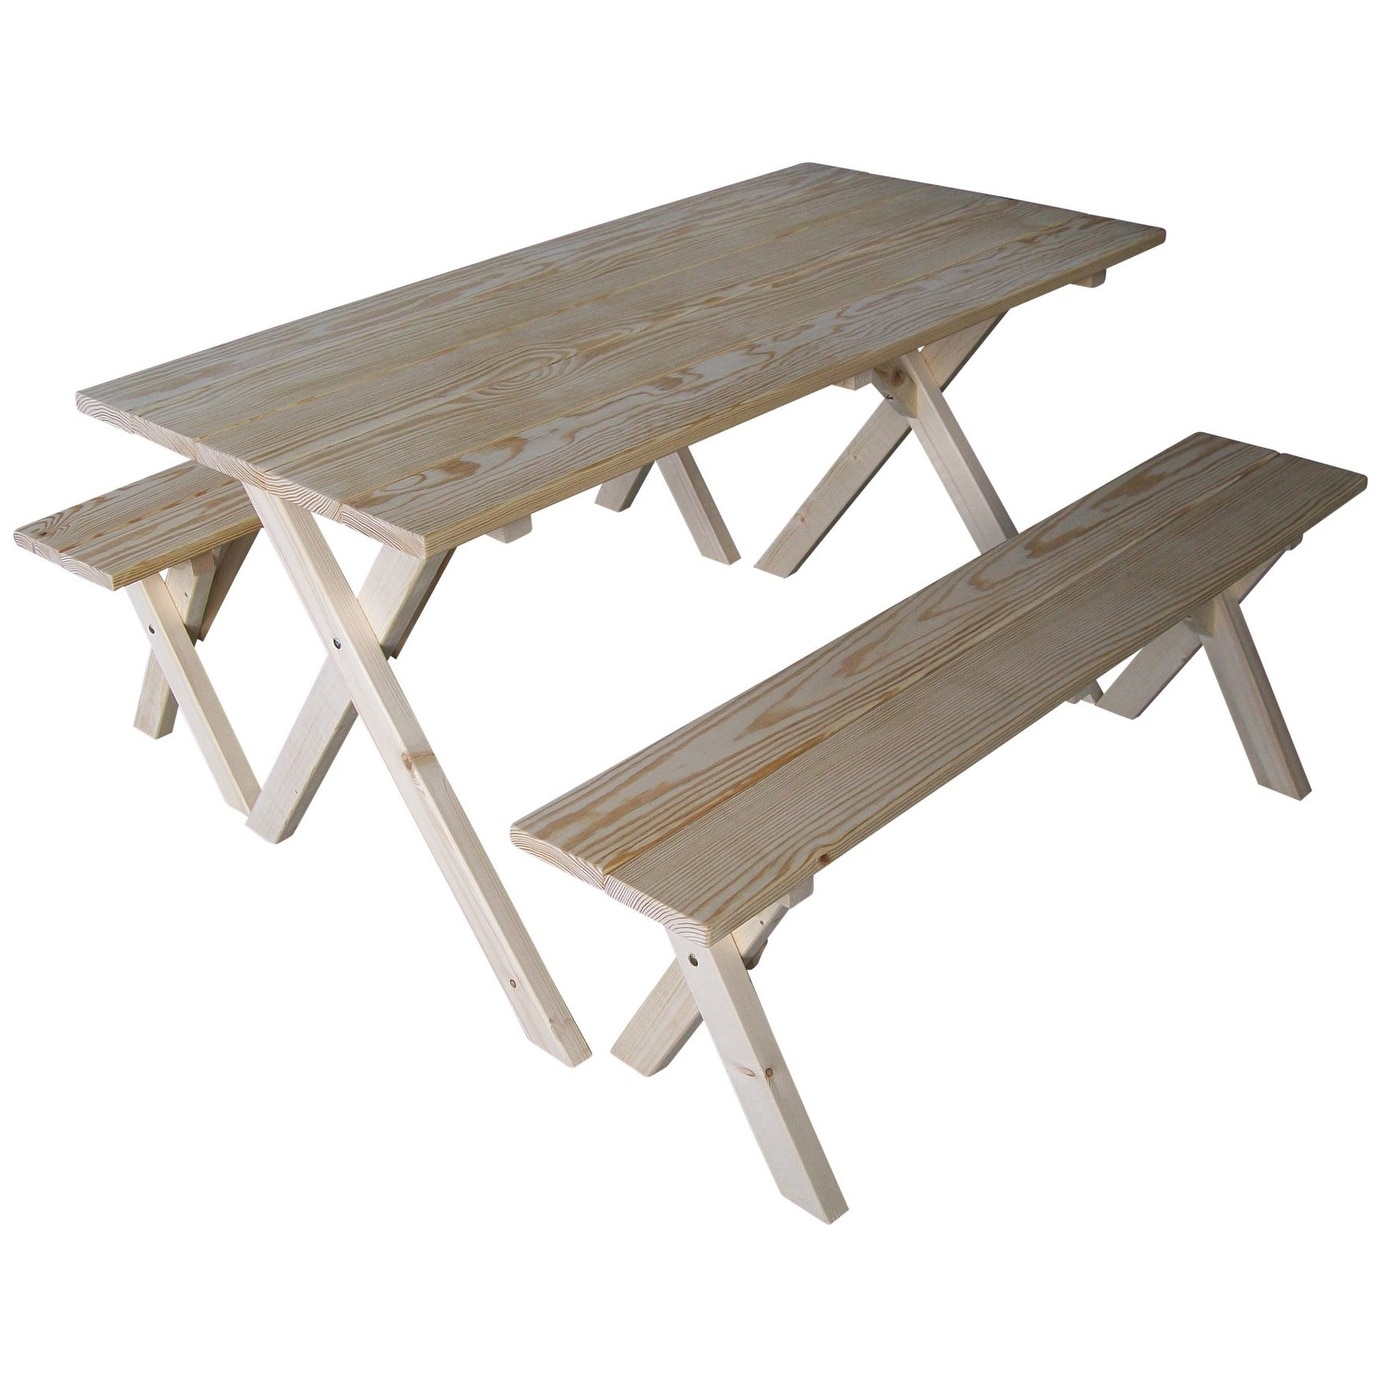 Pine 5 Economy Picnic Table With 2 Benches